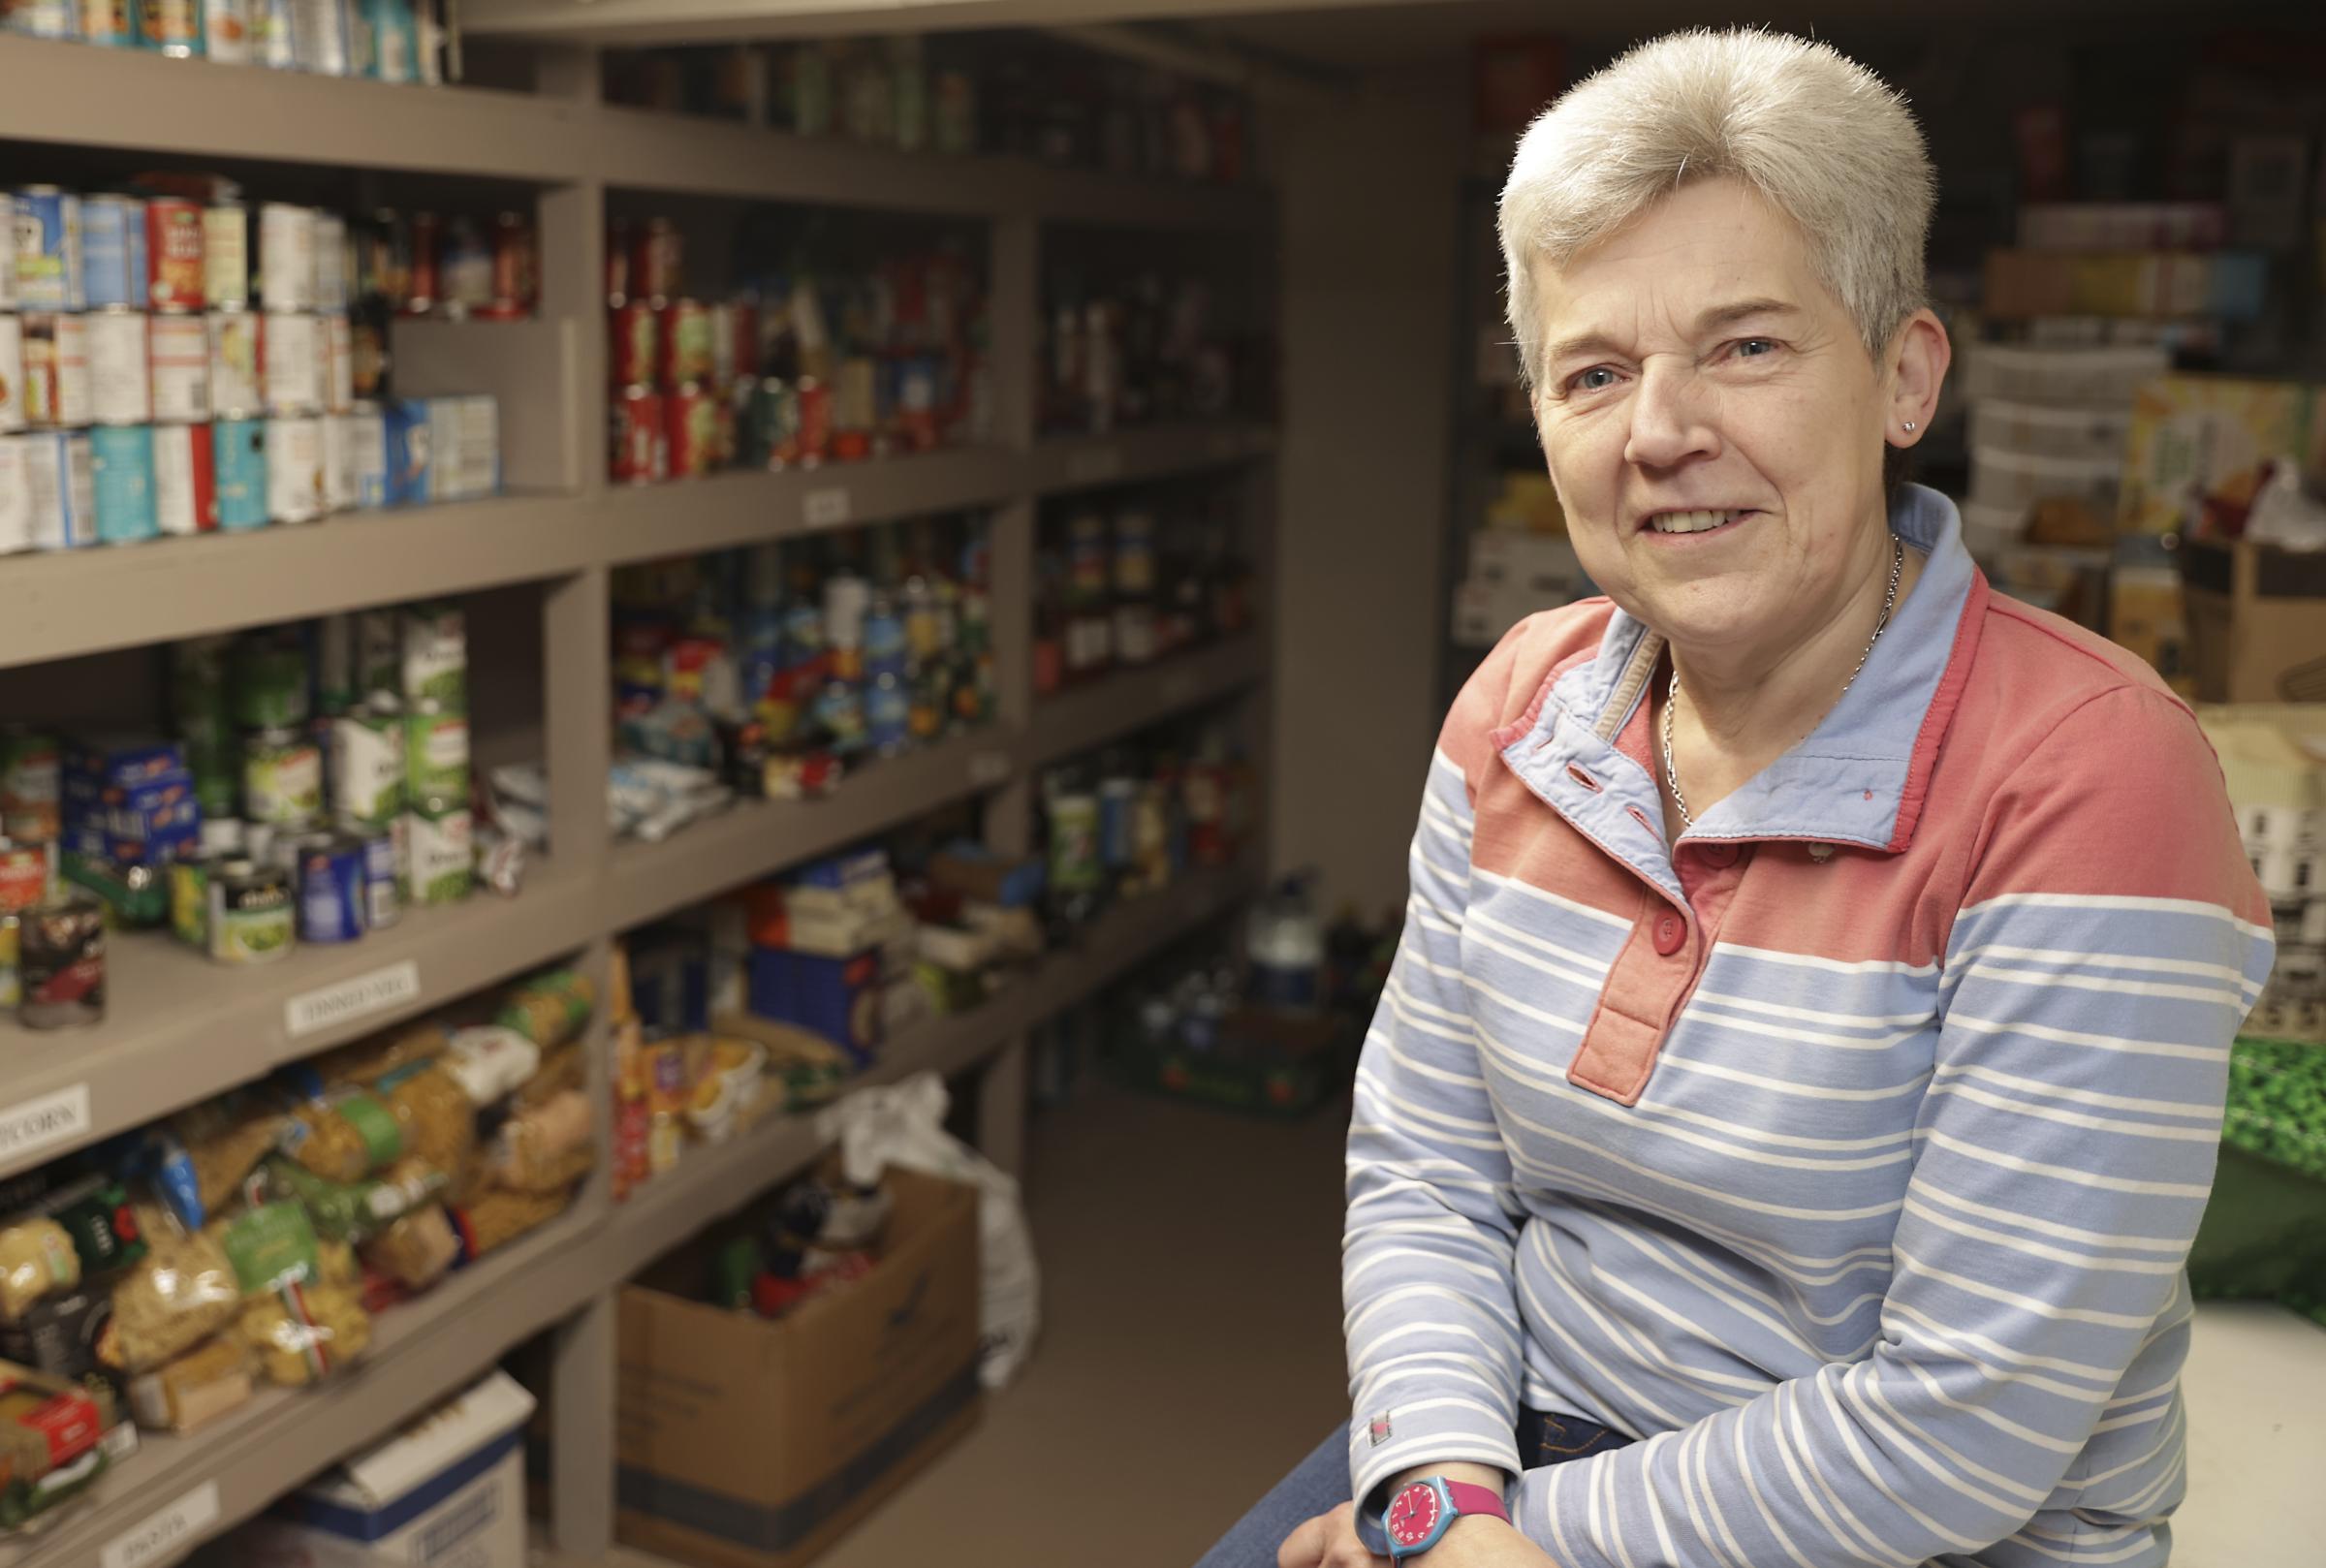 Val Irvine, in the Pantry, Food Bank at The Cornerstone in Lisnaskea. Photo: John McVitty